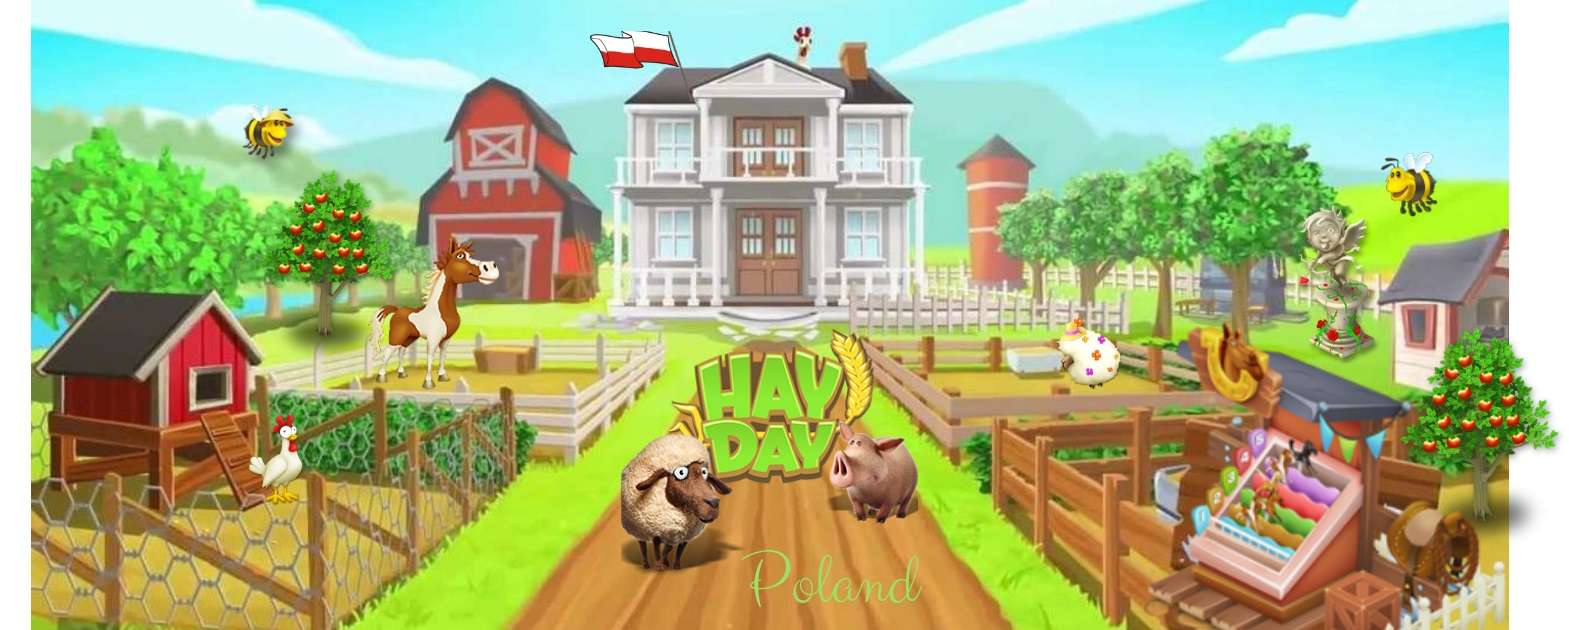 Hay Day Poland puzzle online